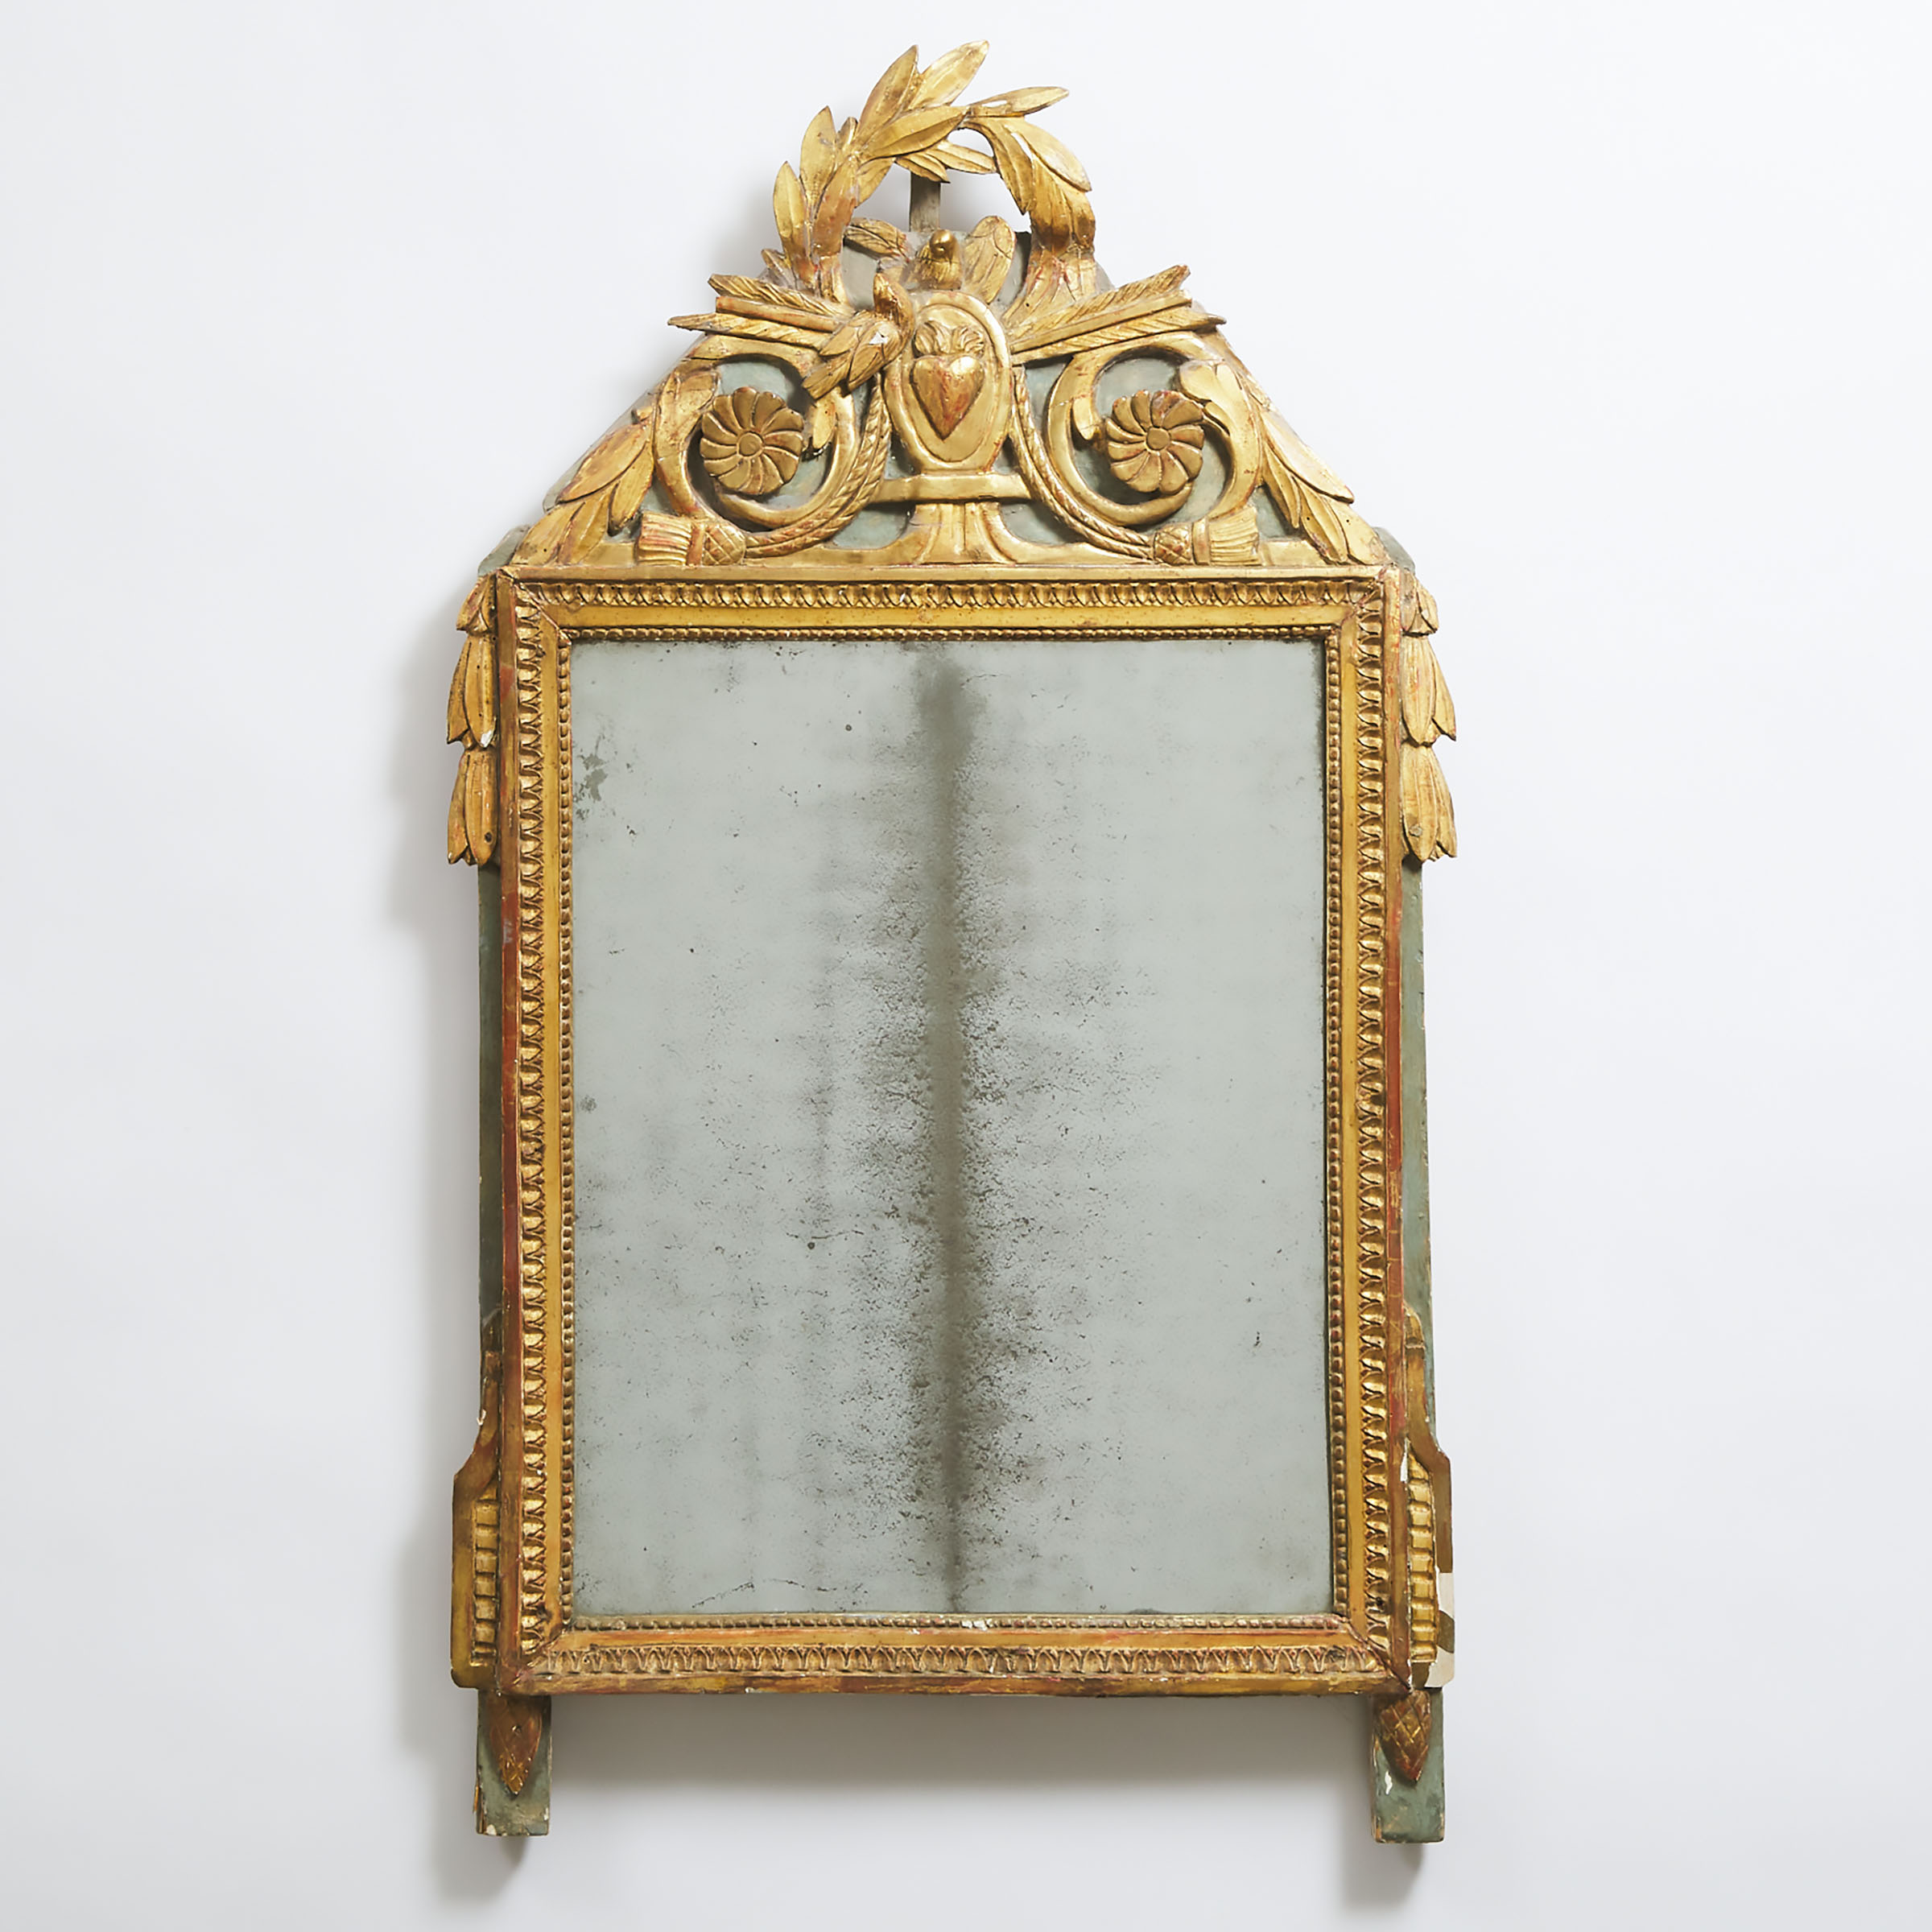 Louis XVI French Provincial Giltwood Mirror, 18th/early 19th century